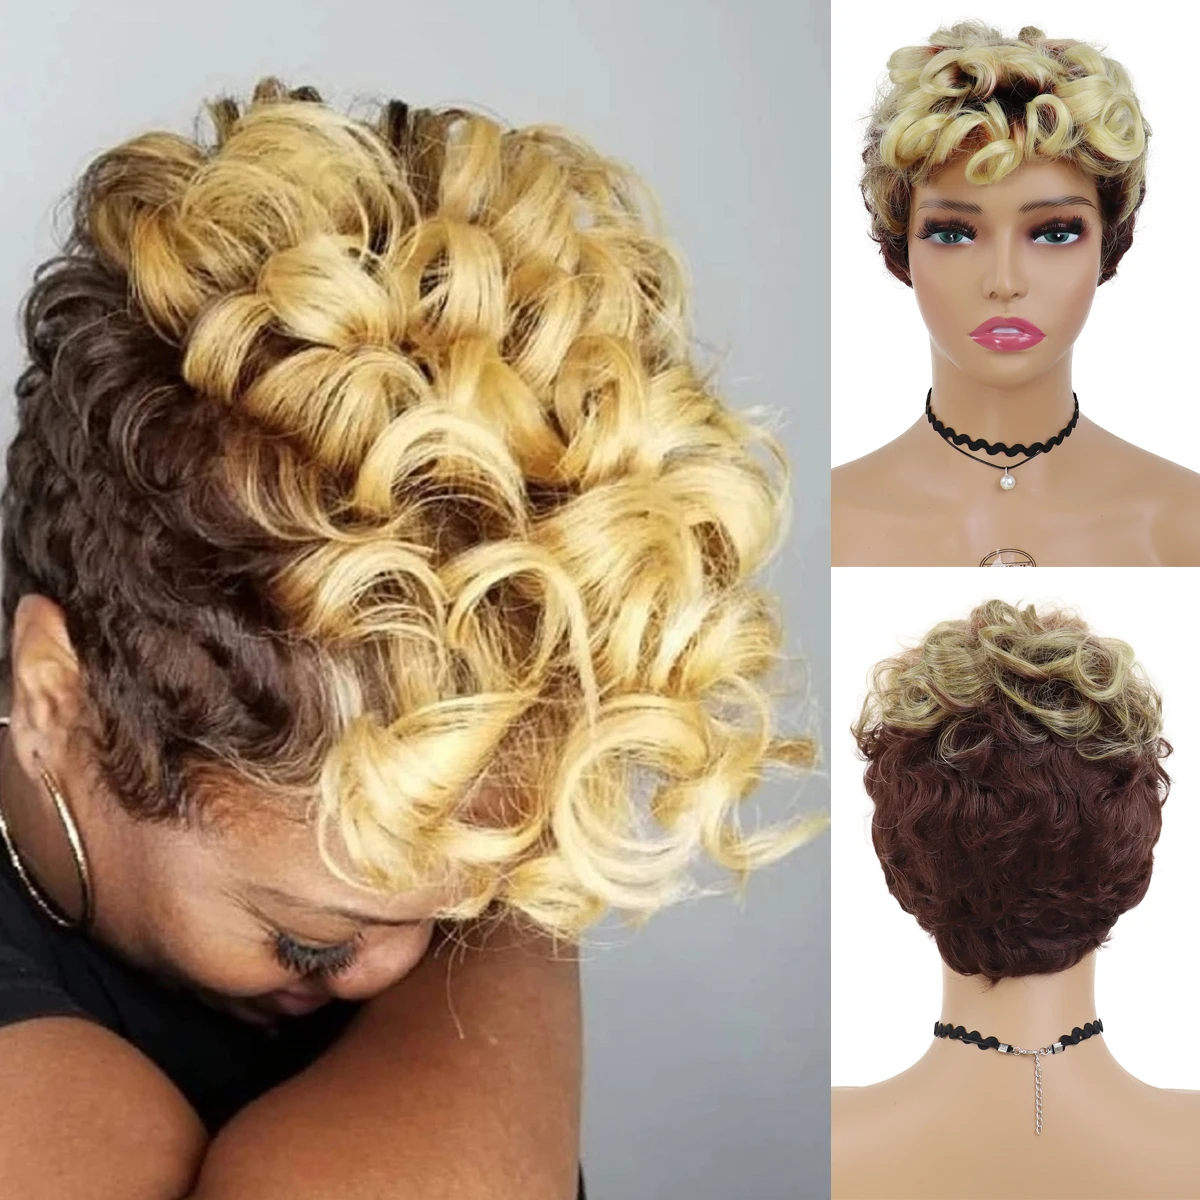 

GNIMEGIL Curly Wig Short Synthetic Hair for Women Blonde Ombre Brown Wig with Bangs Natural Hairstyle Short Wig Female Costume